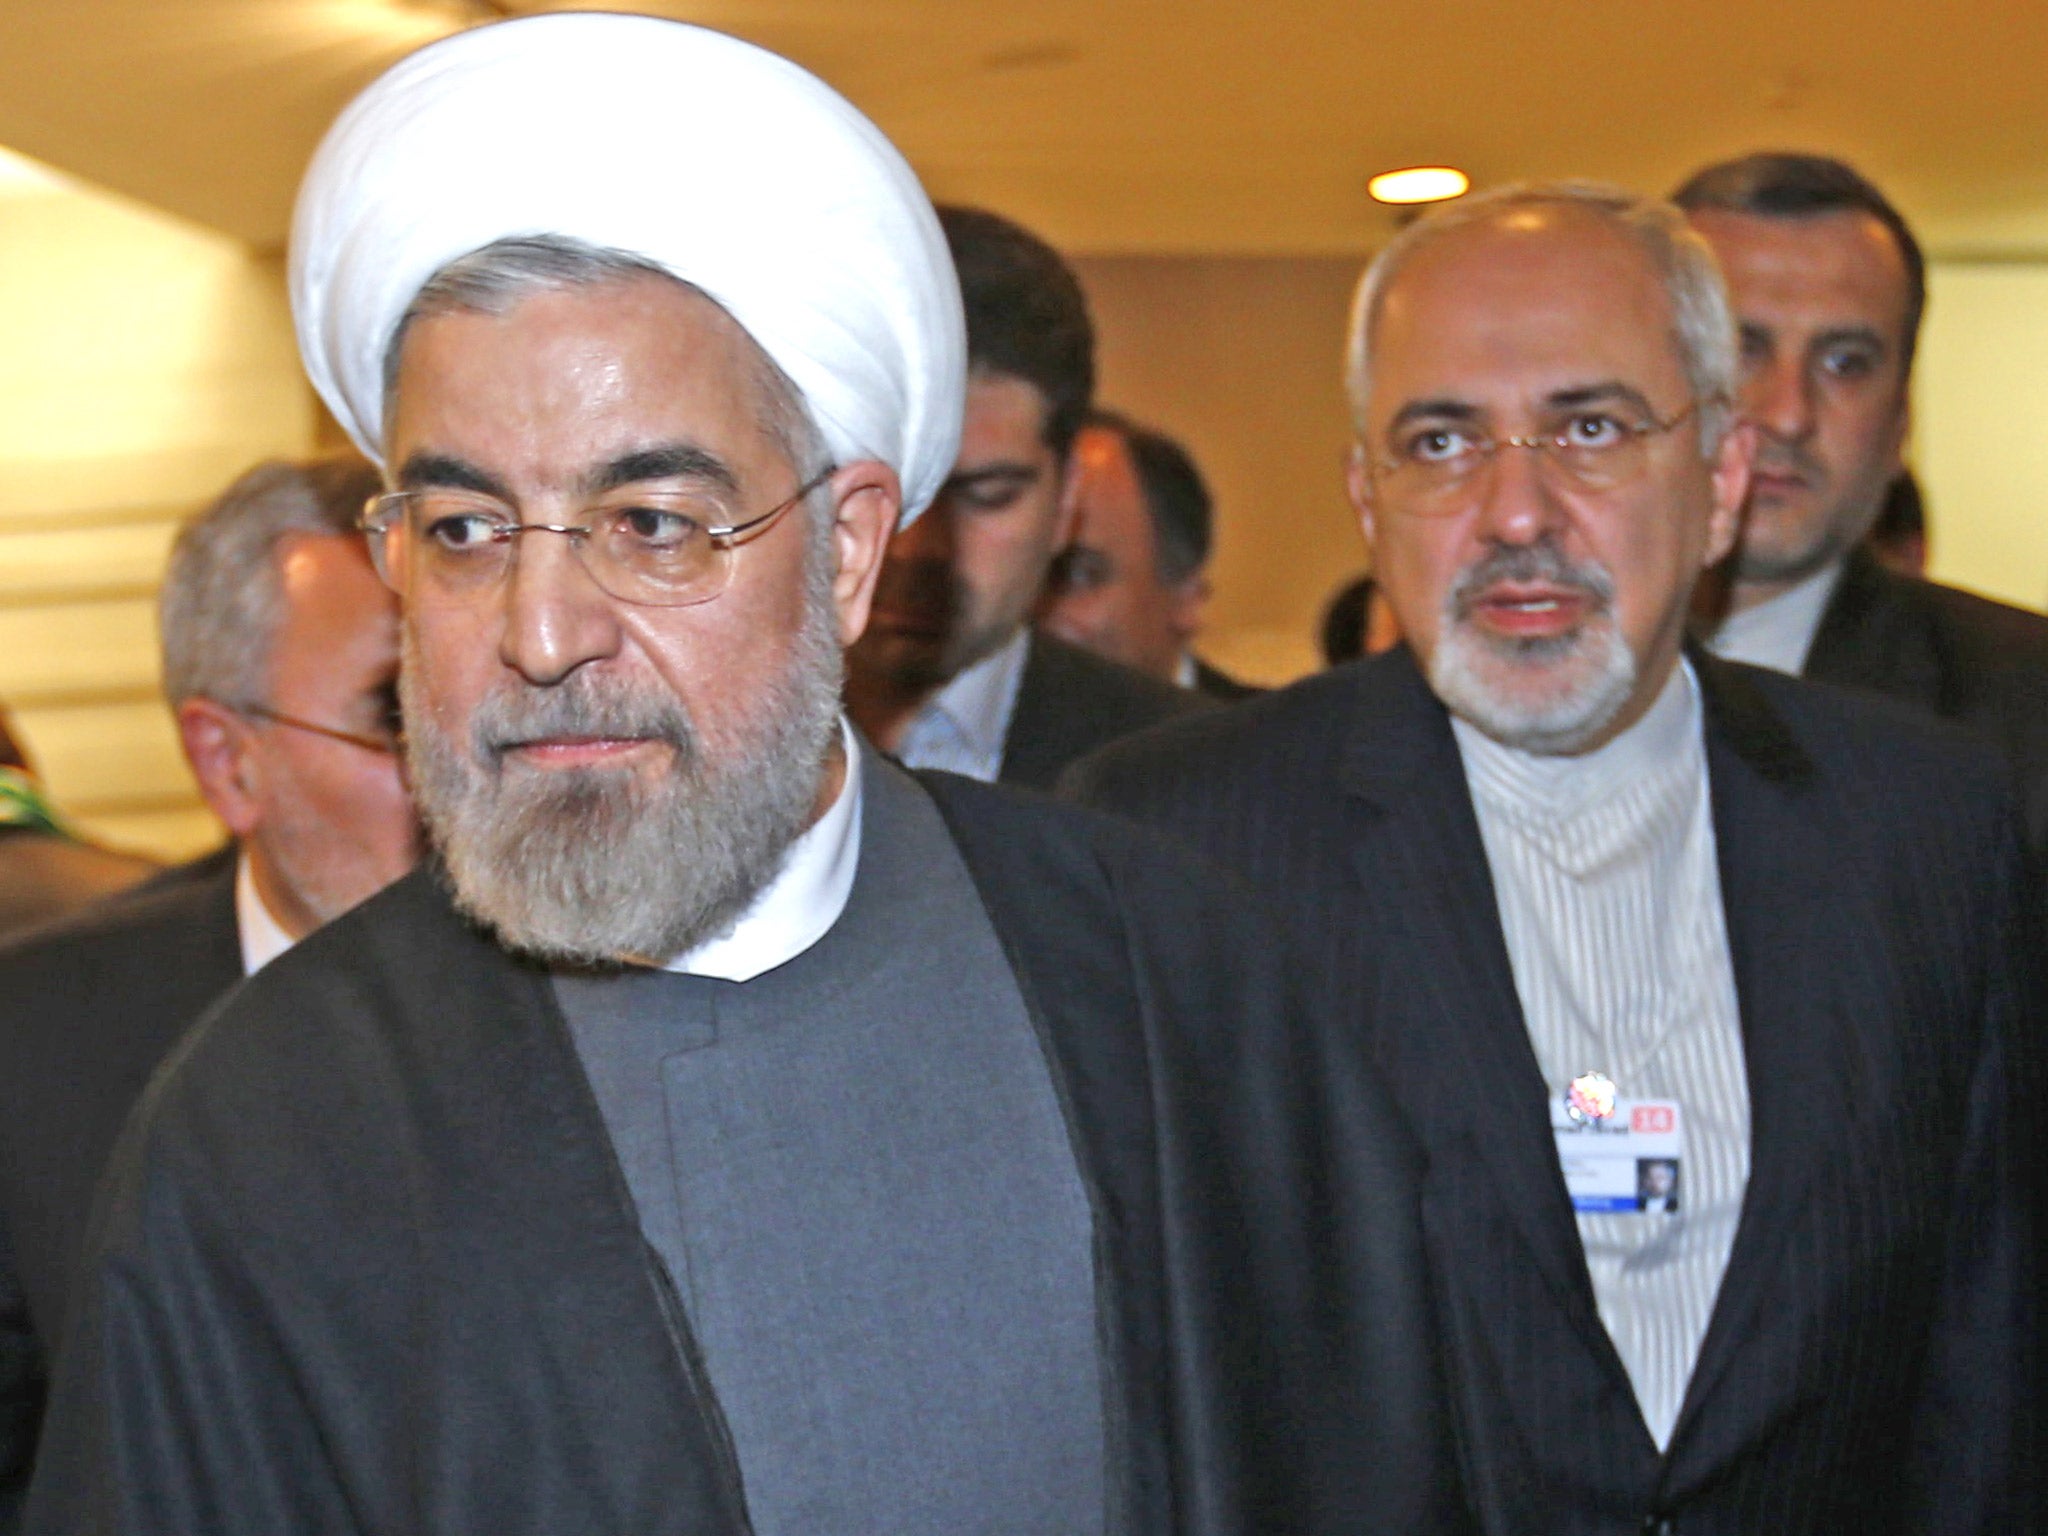 Rouhani and Foreign Minister Zarif at the World Economic Forum in Davos